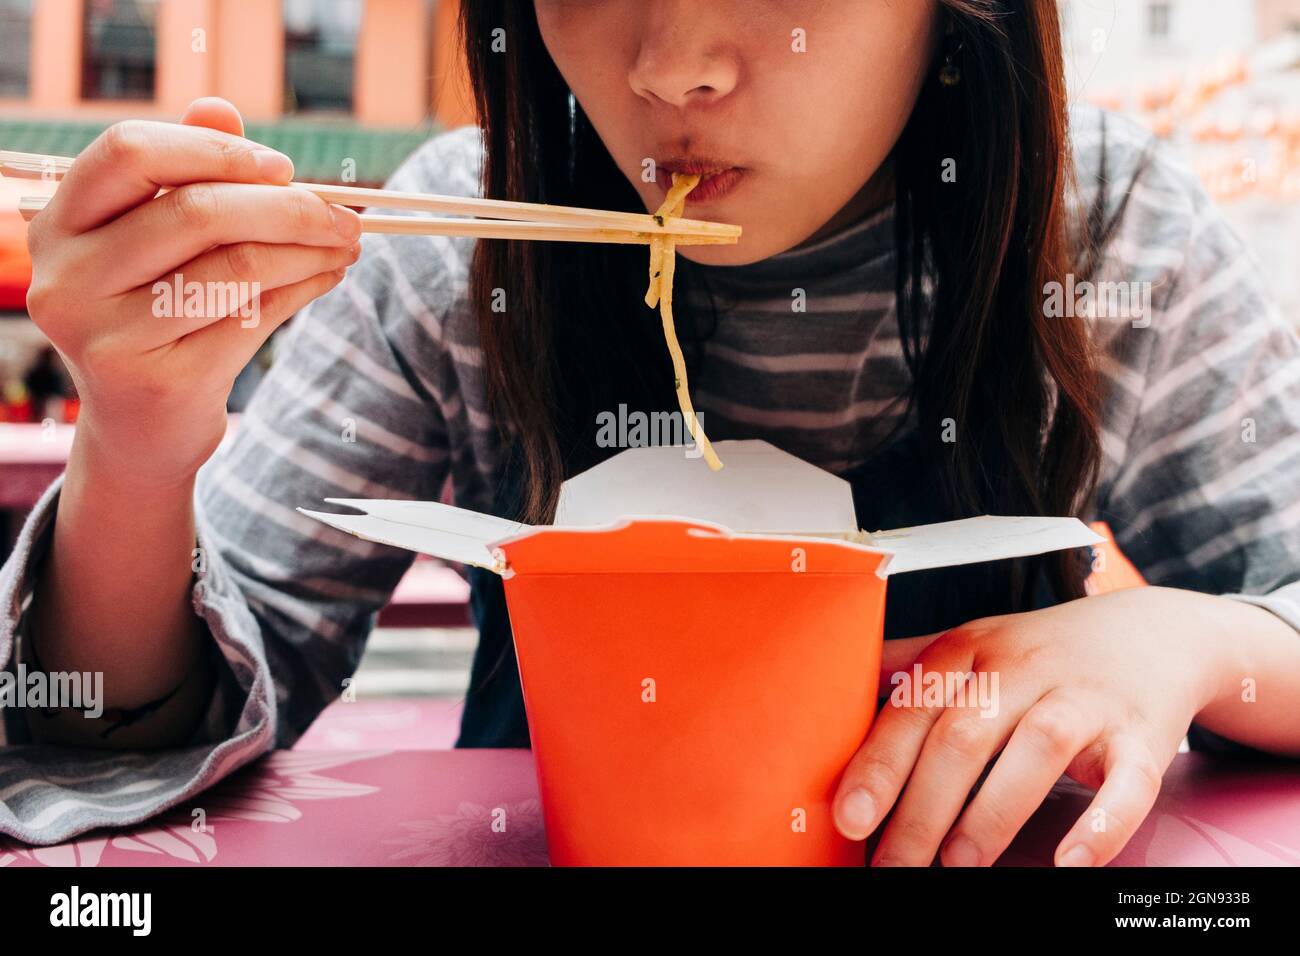 Woman eating noodles with chopsticks Stock Photo